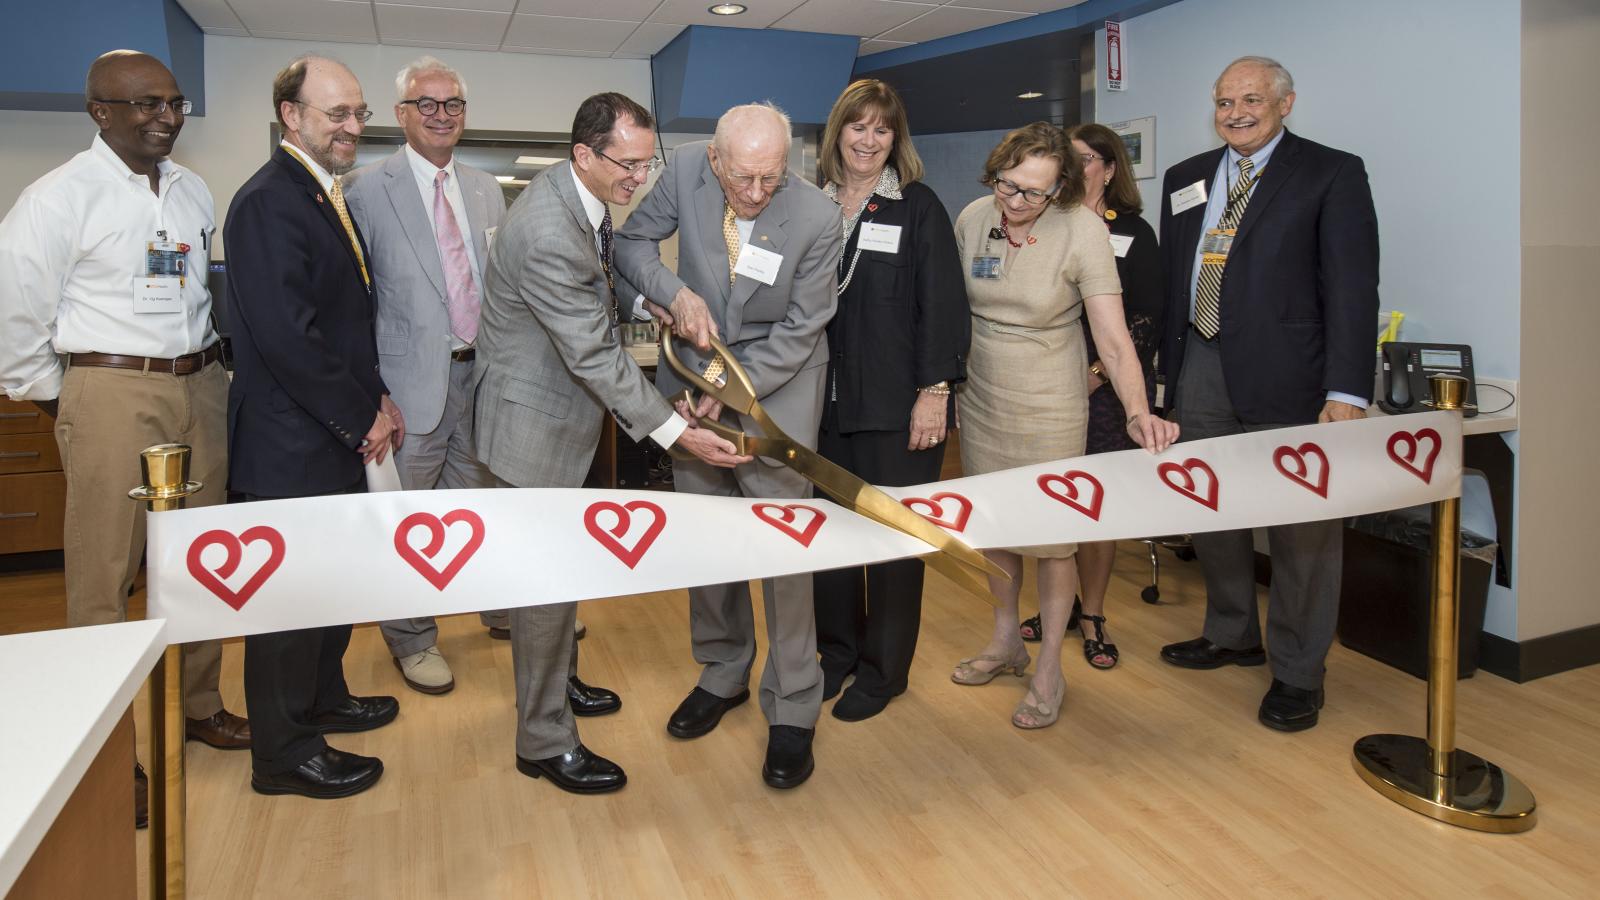 VCU Health leaders and supporters cut the ribbon to the new Cardiac Imaging Suite on July 17. (L to R) Vigneshwar Kasirajan, M.D., chair of the Department of Surgery; Ken Ellenbogen, M.D., chair of the Division of Cardiology; Peter Buckley, M.D., dean of the School of Medicine; William Hundley, M.D., director of the Pauley Heart Center; Stan Pauley; Kathy Pauley Hickok; Marsha Rappley, M.D., vice president for health sciences and CEO of the VCU Health System; Deborah Davis, CEO of VCU Health System Hospital